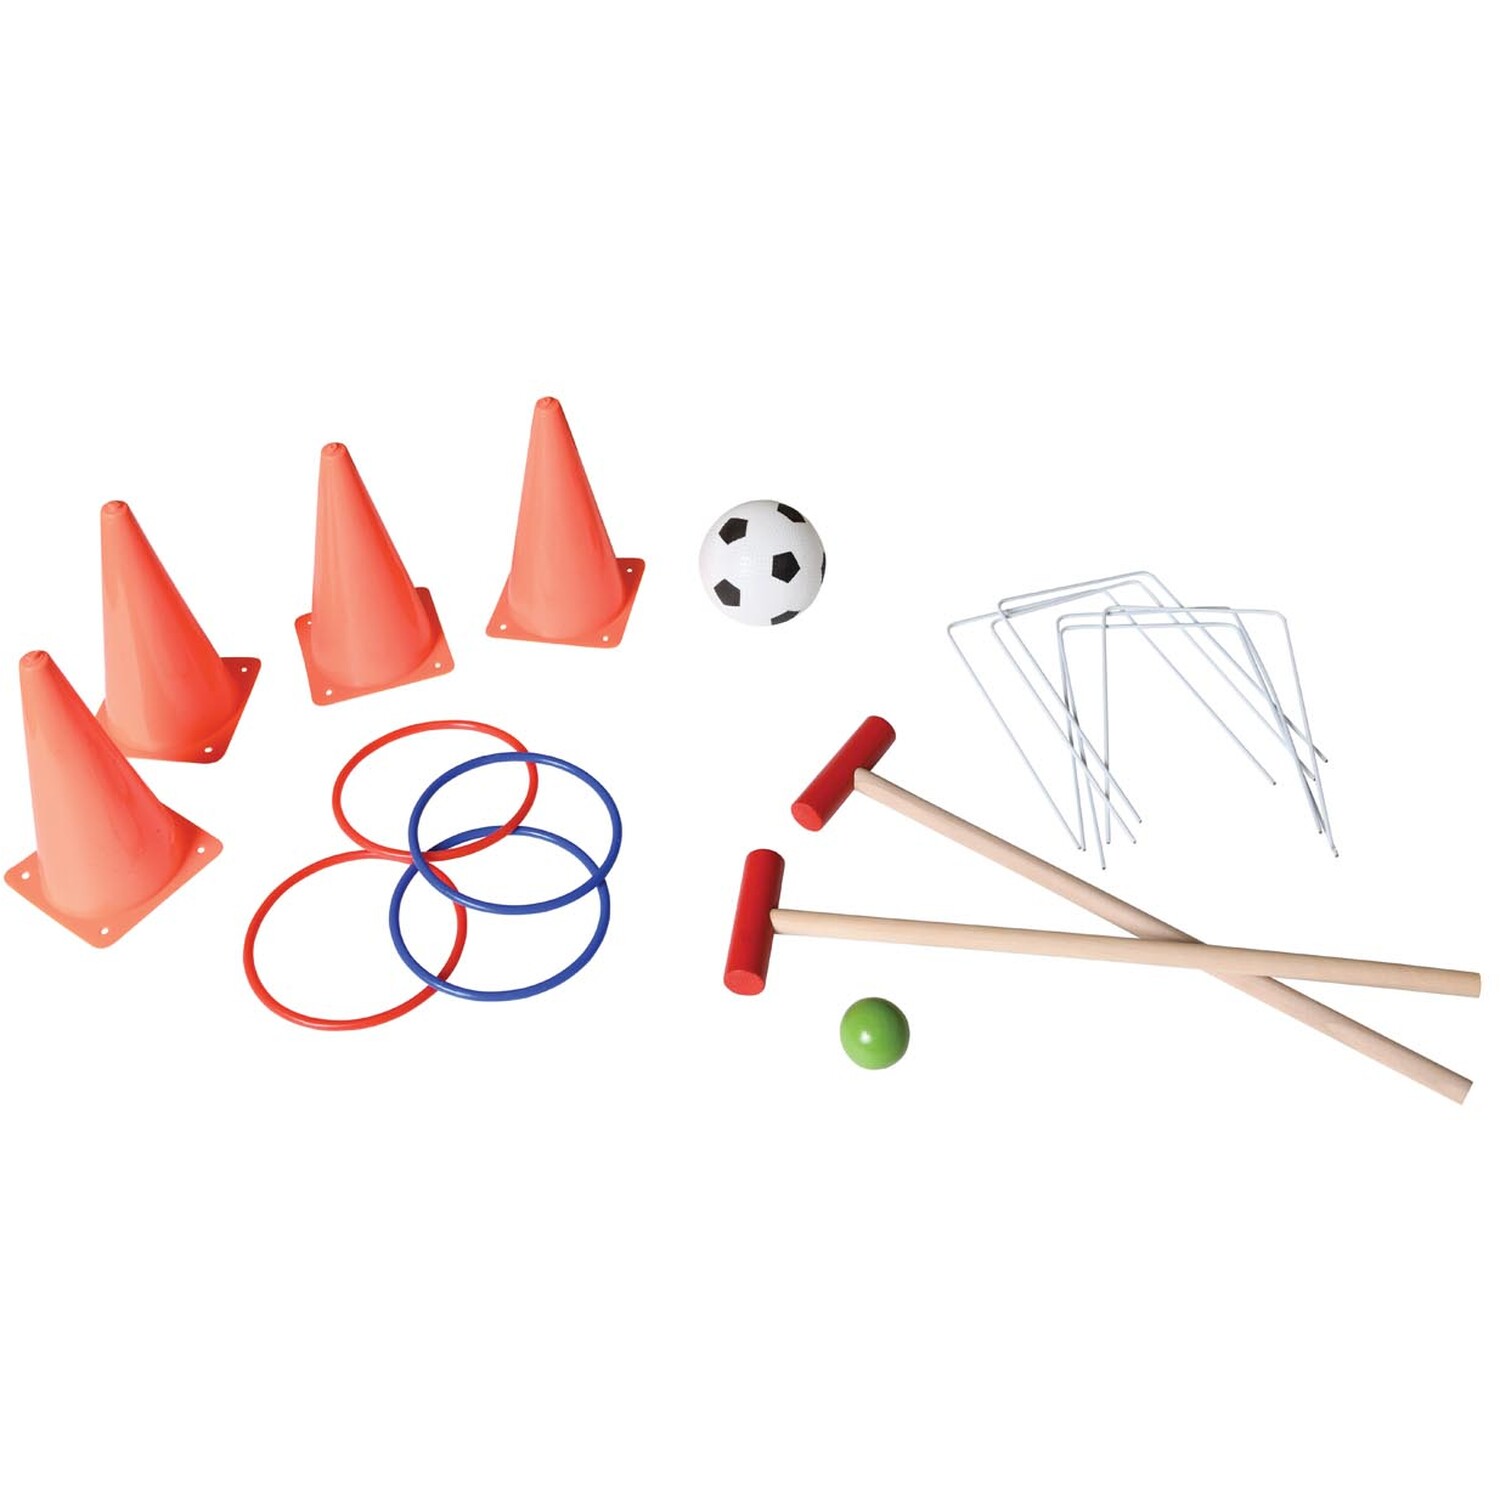 4-in-1 Game Set Image 1